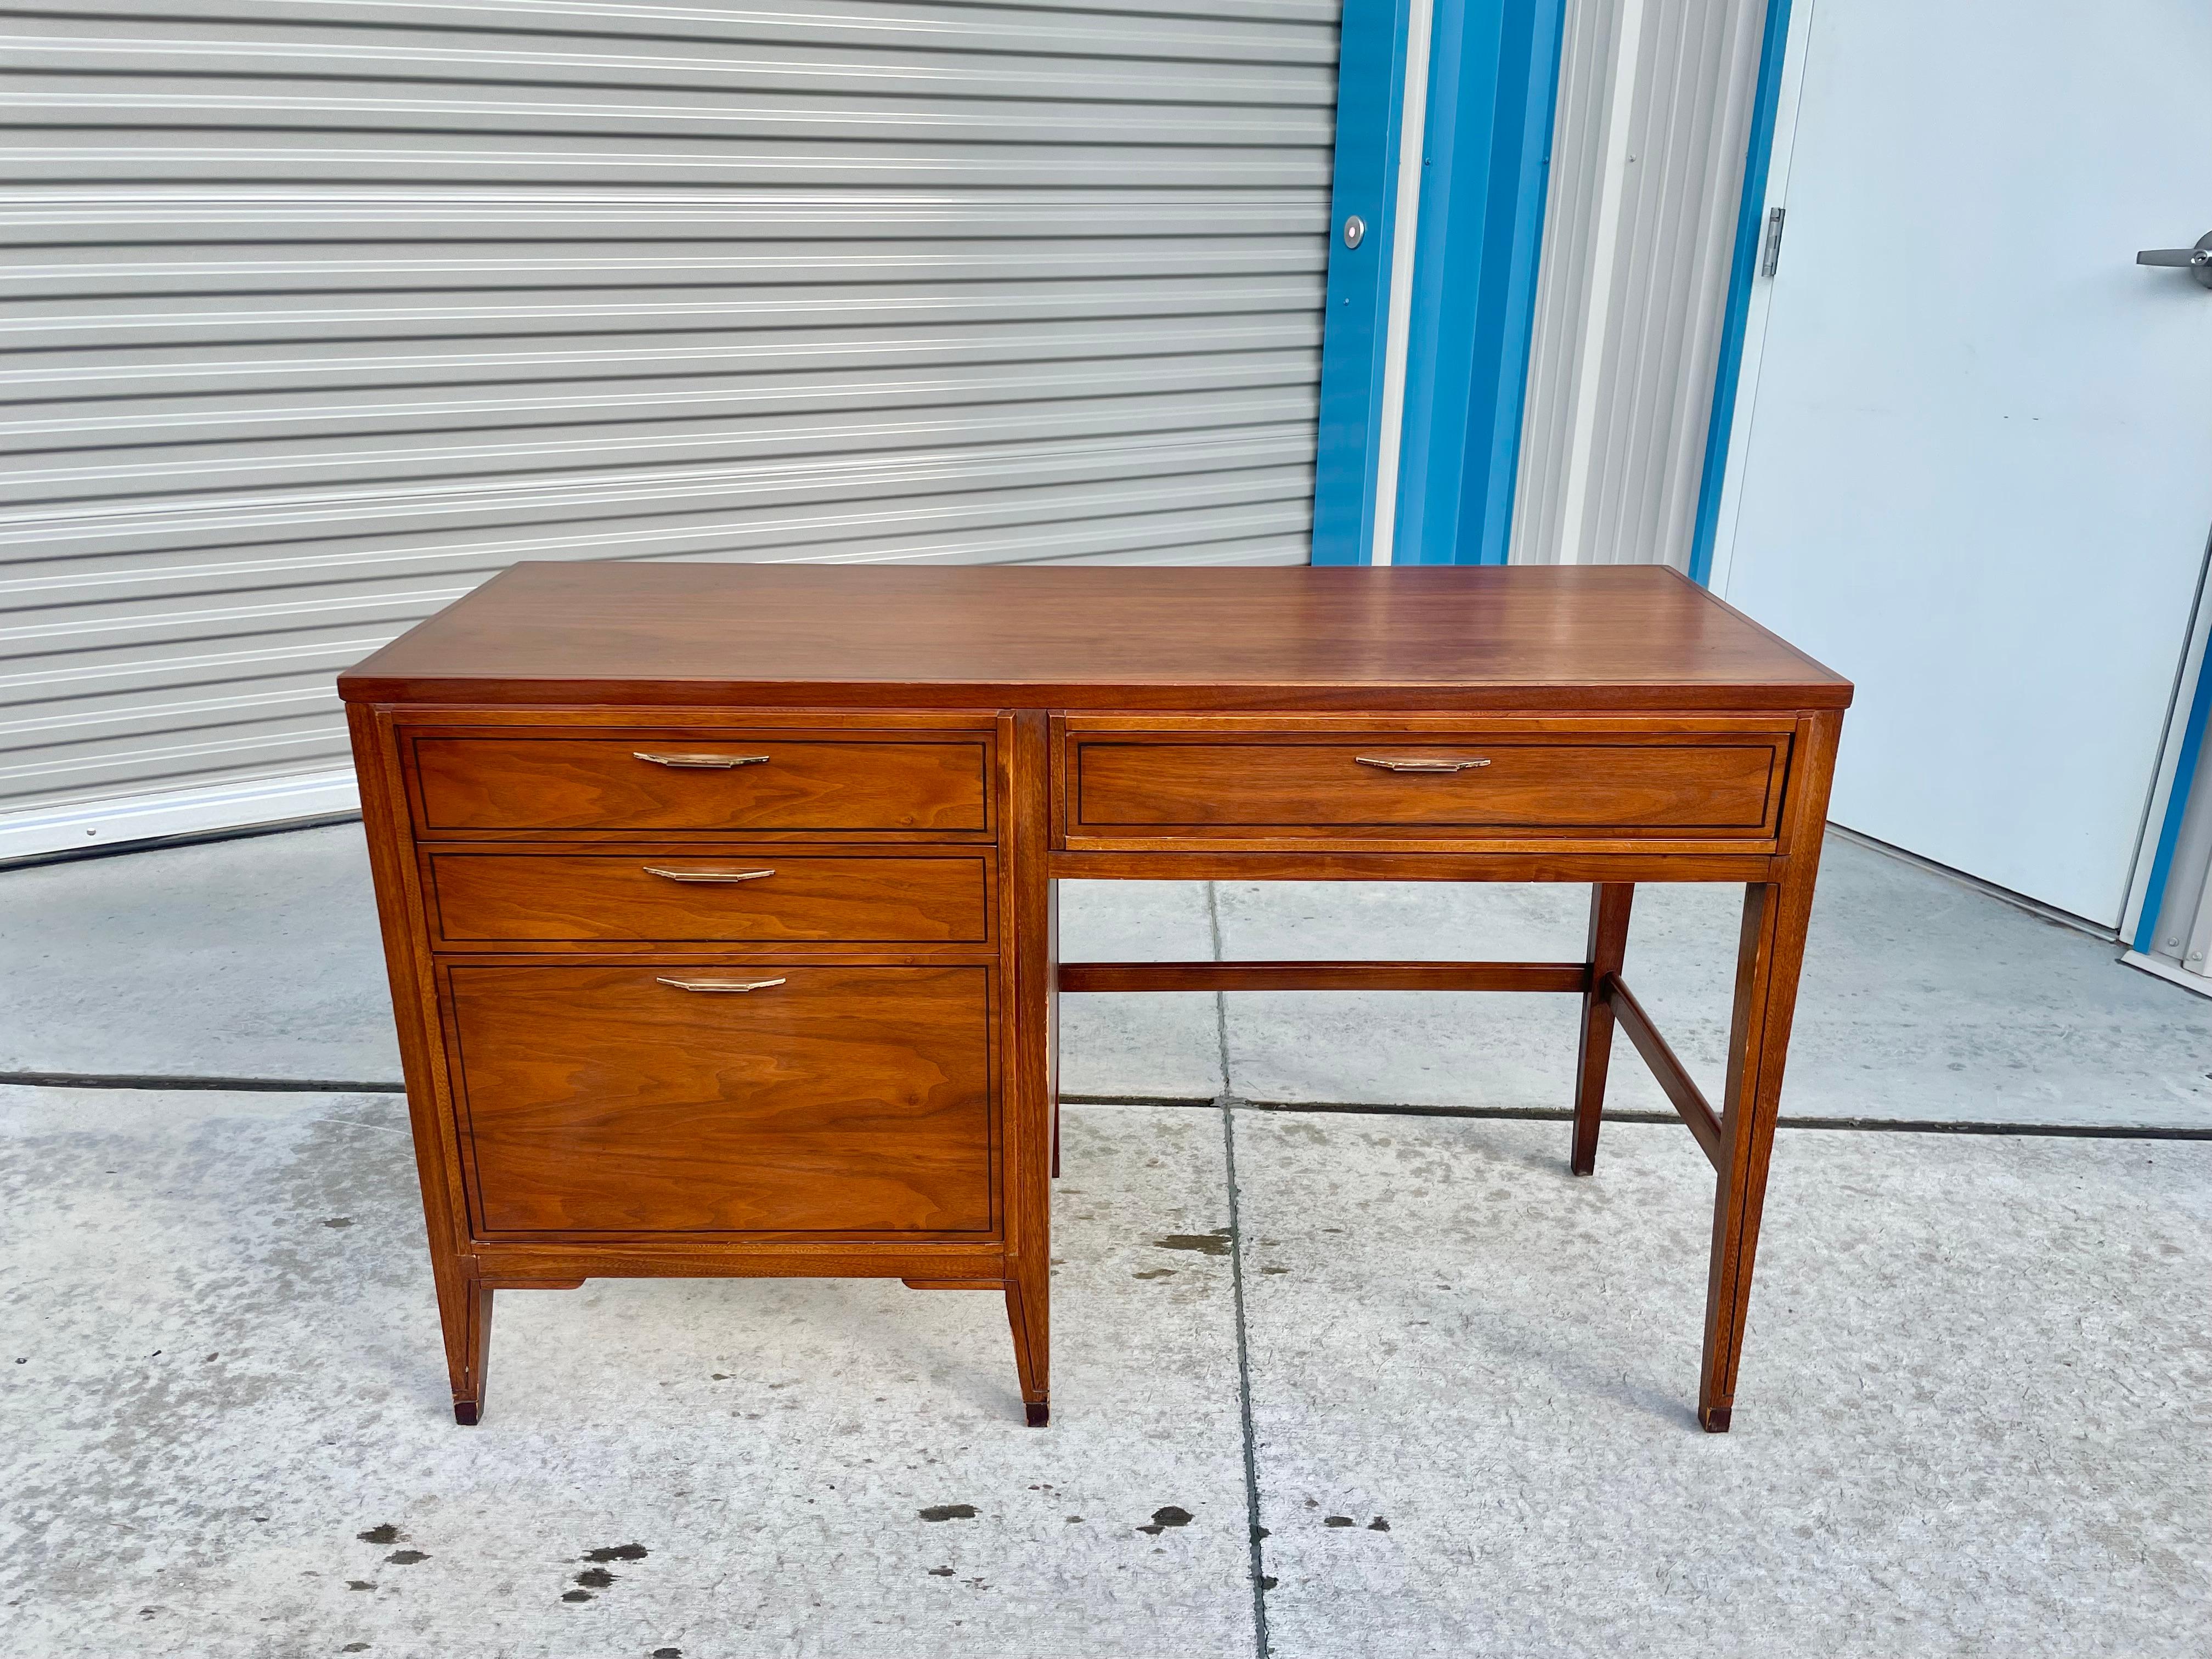 This unique walnut writing desk was designed and manufactured by Kent Coffey Tempo in the United States circa 1960. the vintage writing desk features four drawers giving you plenty of storage space for all your office needs. Each drawer features a